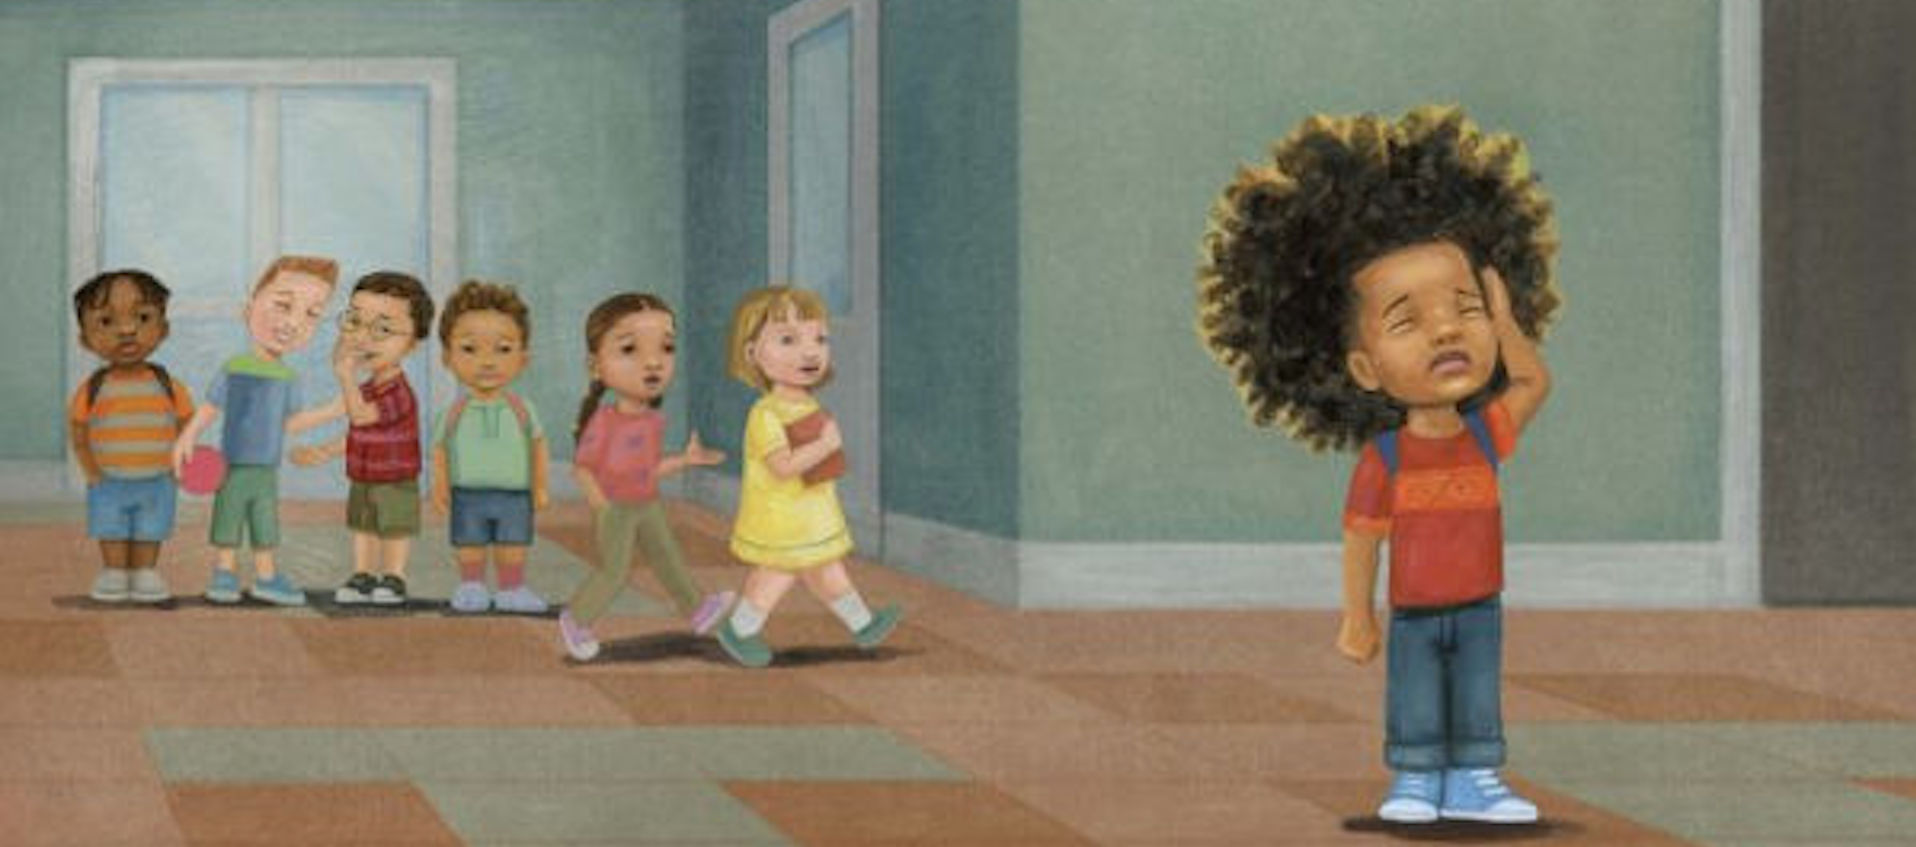 Children's book illustration of a school hallway. A group of white children talk among themselves in the left background. In the right foreground, a Black boy with an Afro puts his palm to his head in frustration.